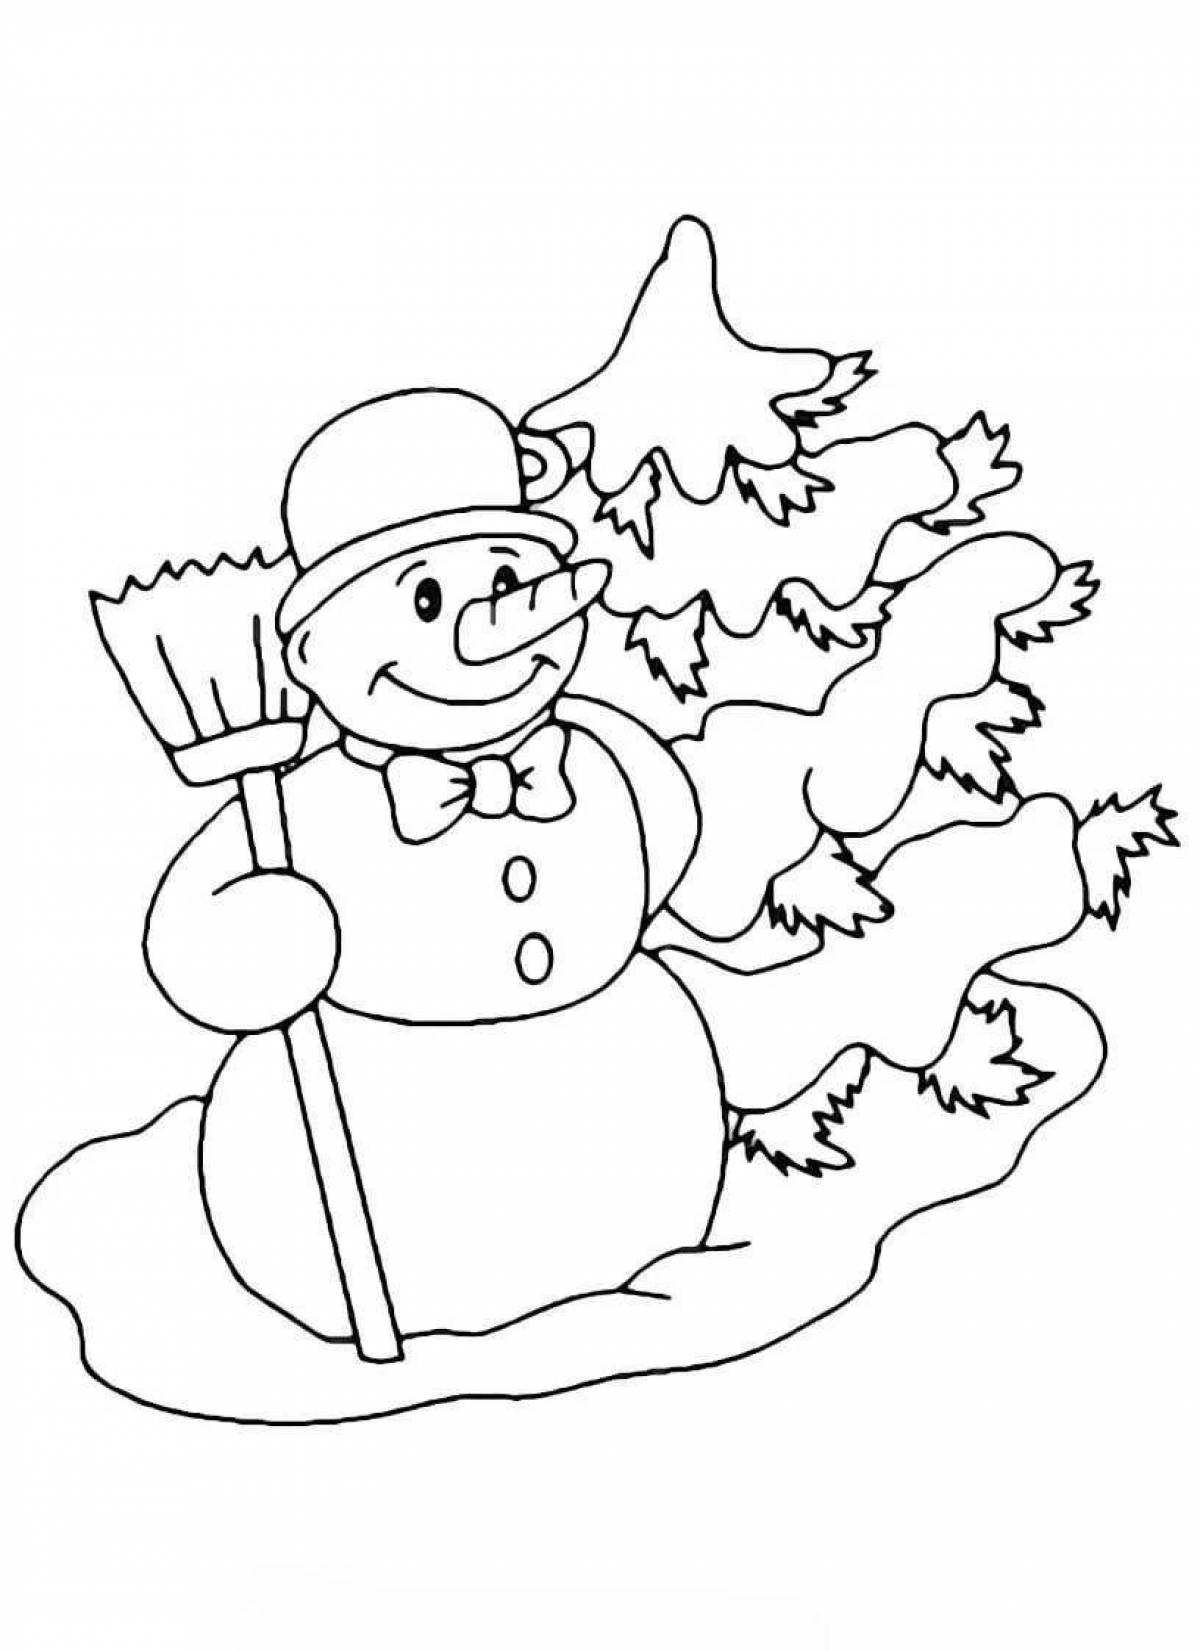 Funny coloring book snowman with a broom